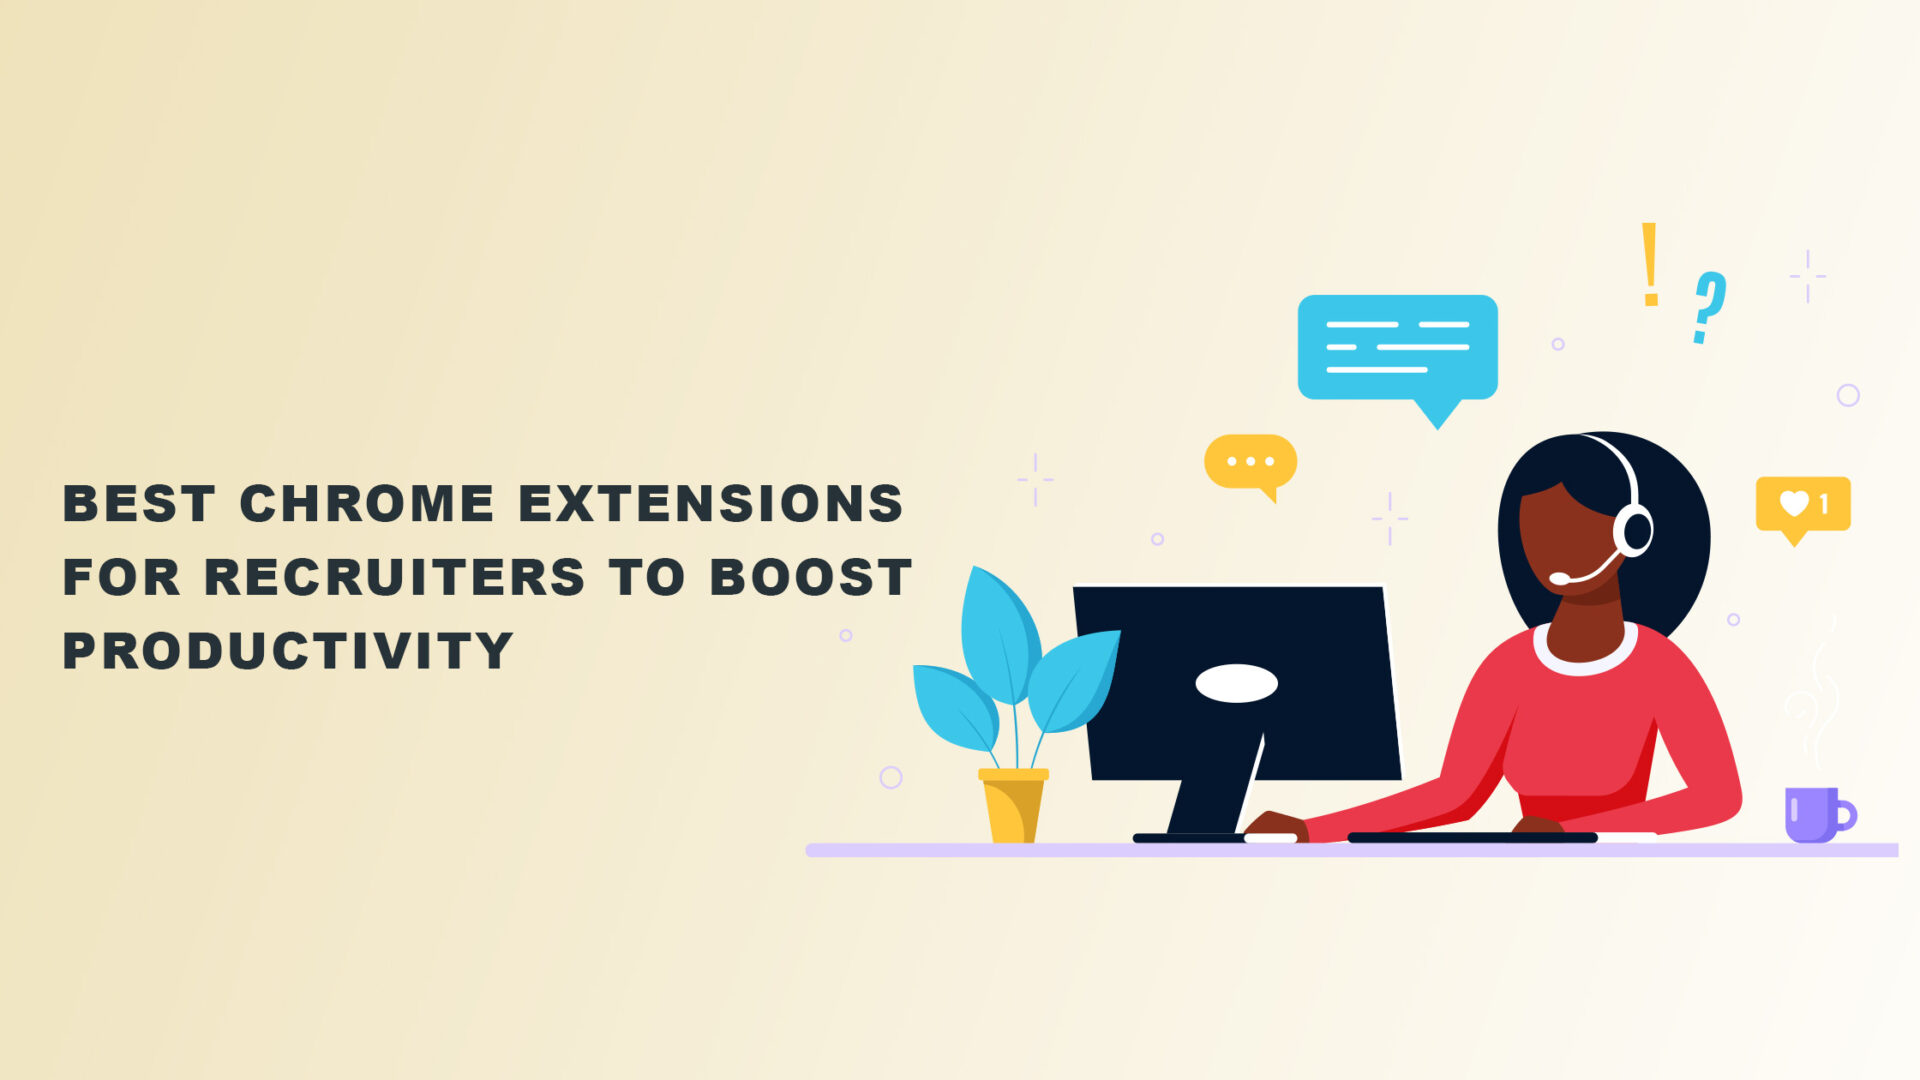 Best Chrome Extensions for Recruiters to Boost Productivity